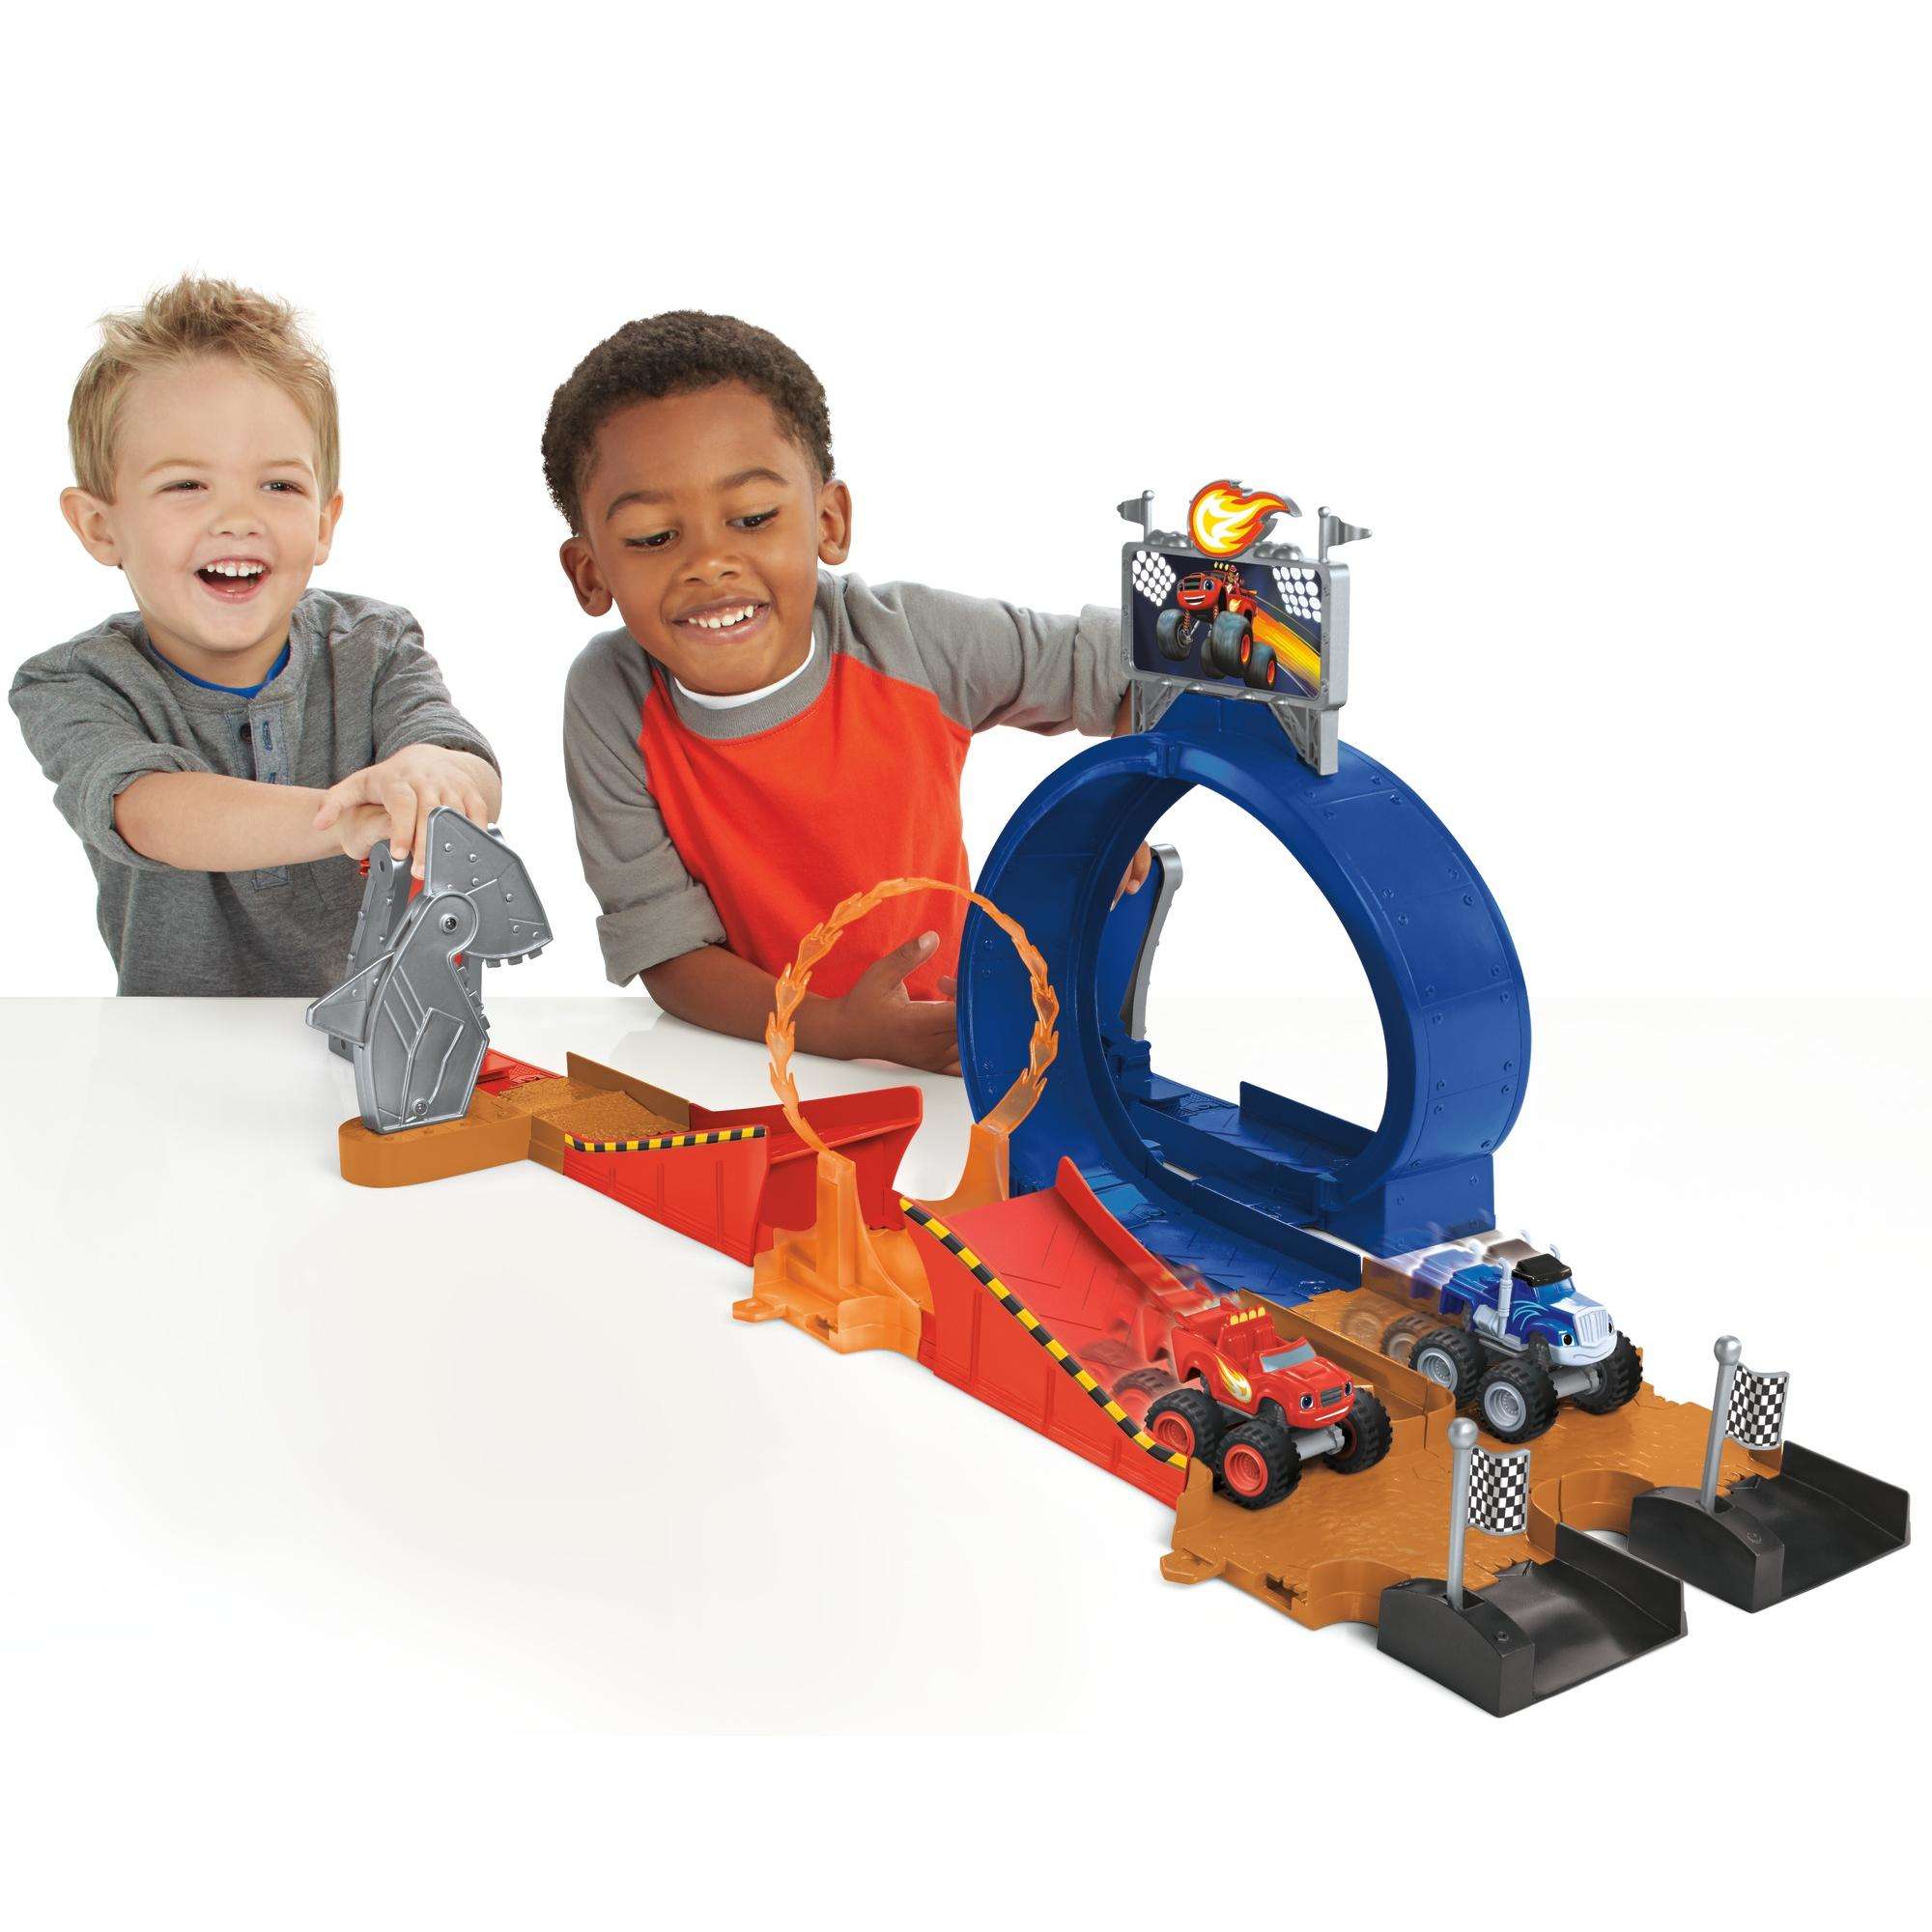 Fisher-Price Nickelodeon Blaze and the Monster Machines Monster Dome Playset - image 3 of 13